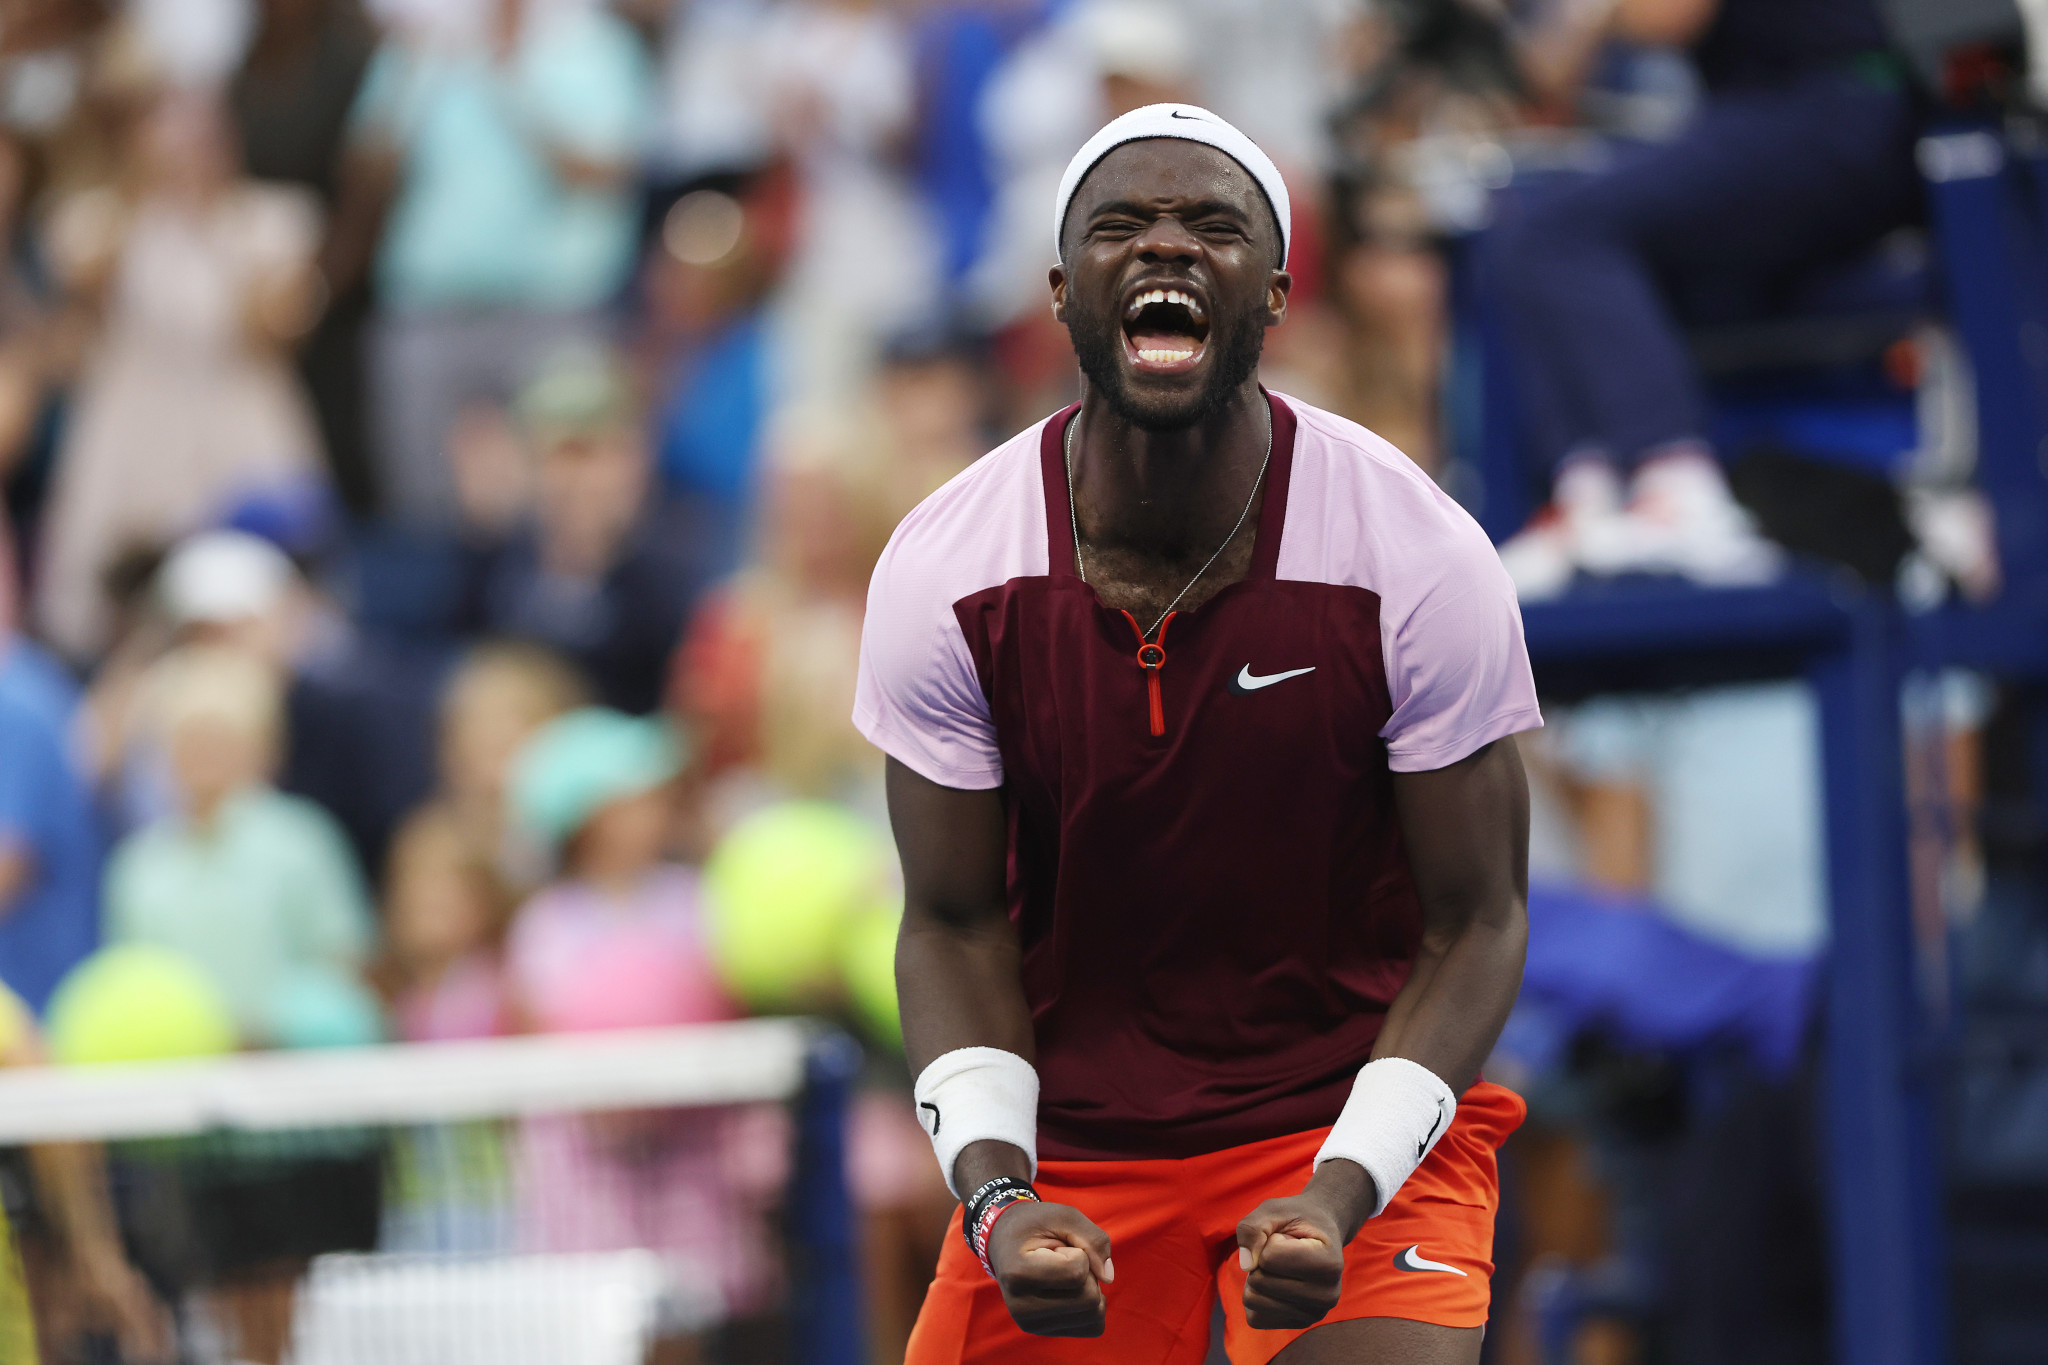 Home favourite Frances Tiafoe reached the US Open fourth round with a straight sets victory against Diego Schwartzman of Argentina ©Getty Images